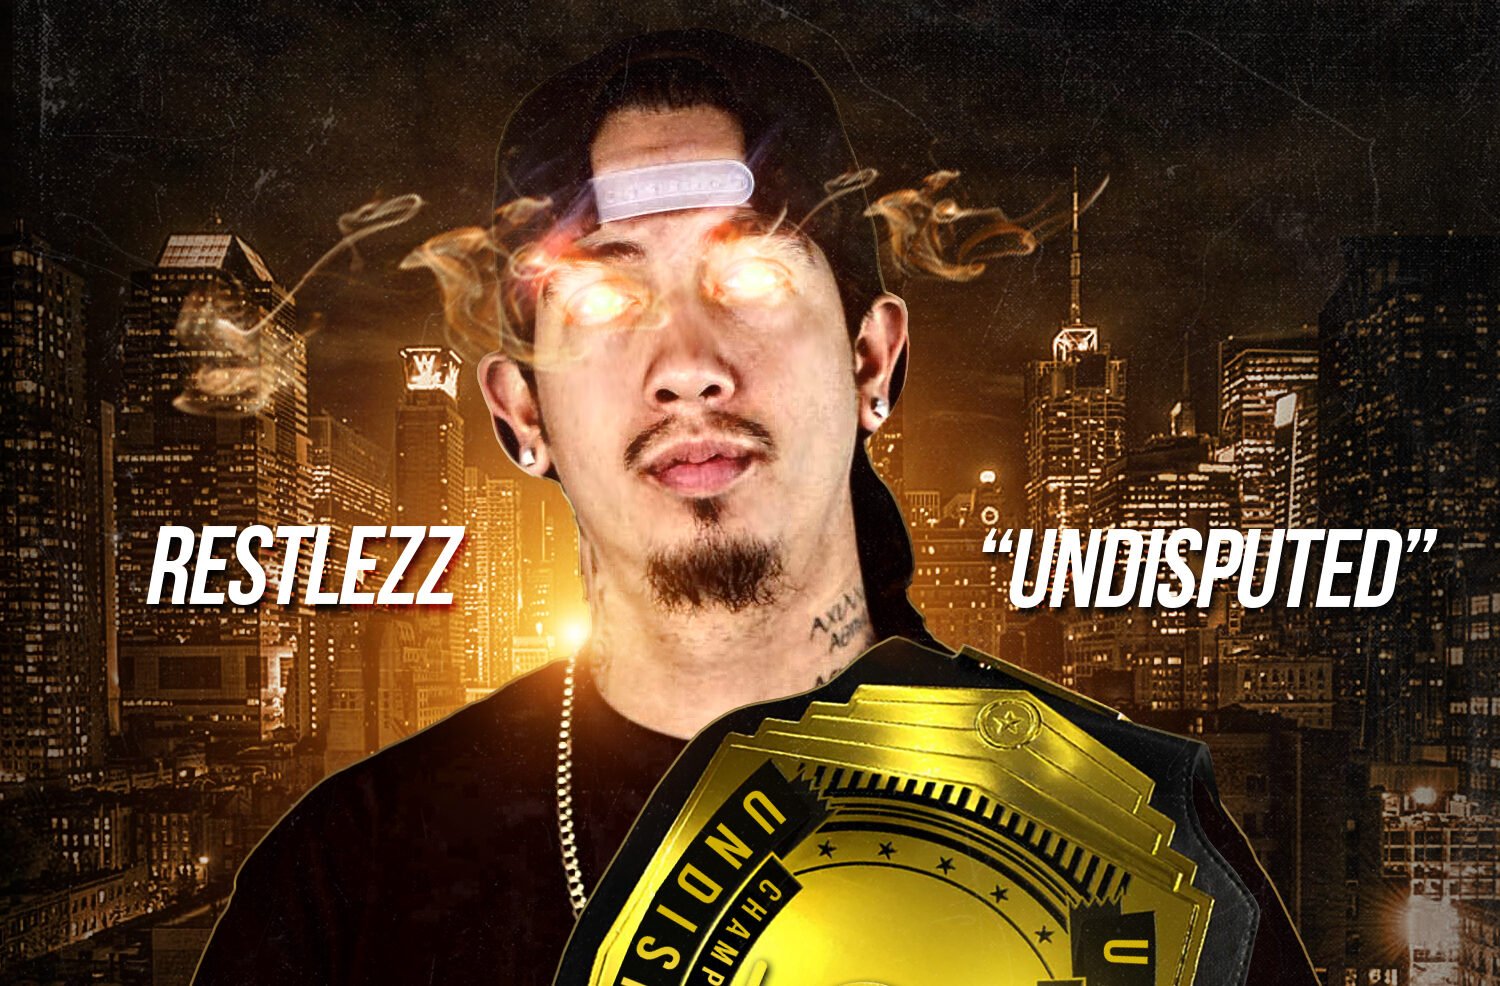 Renowned Artist Restlezz Releases His Highly Anticipated New Single, “Undisputed”